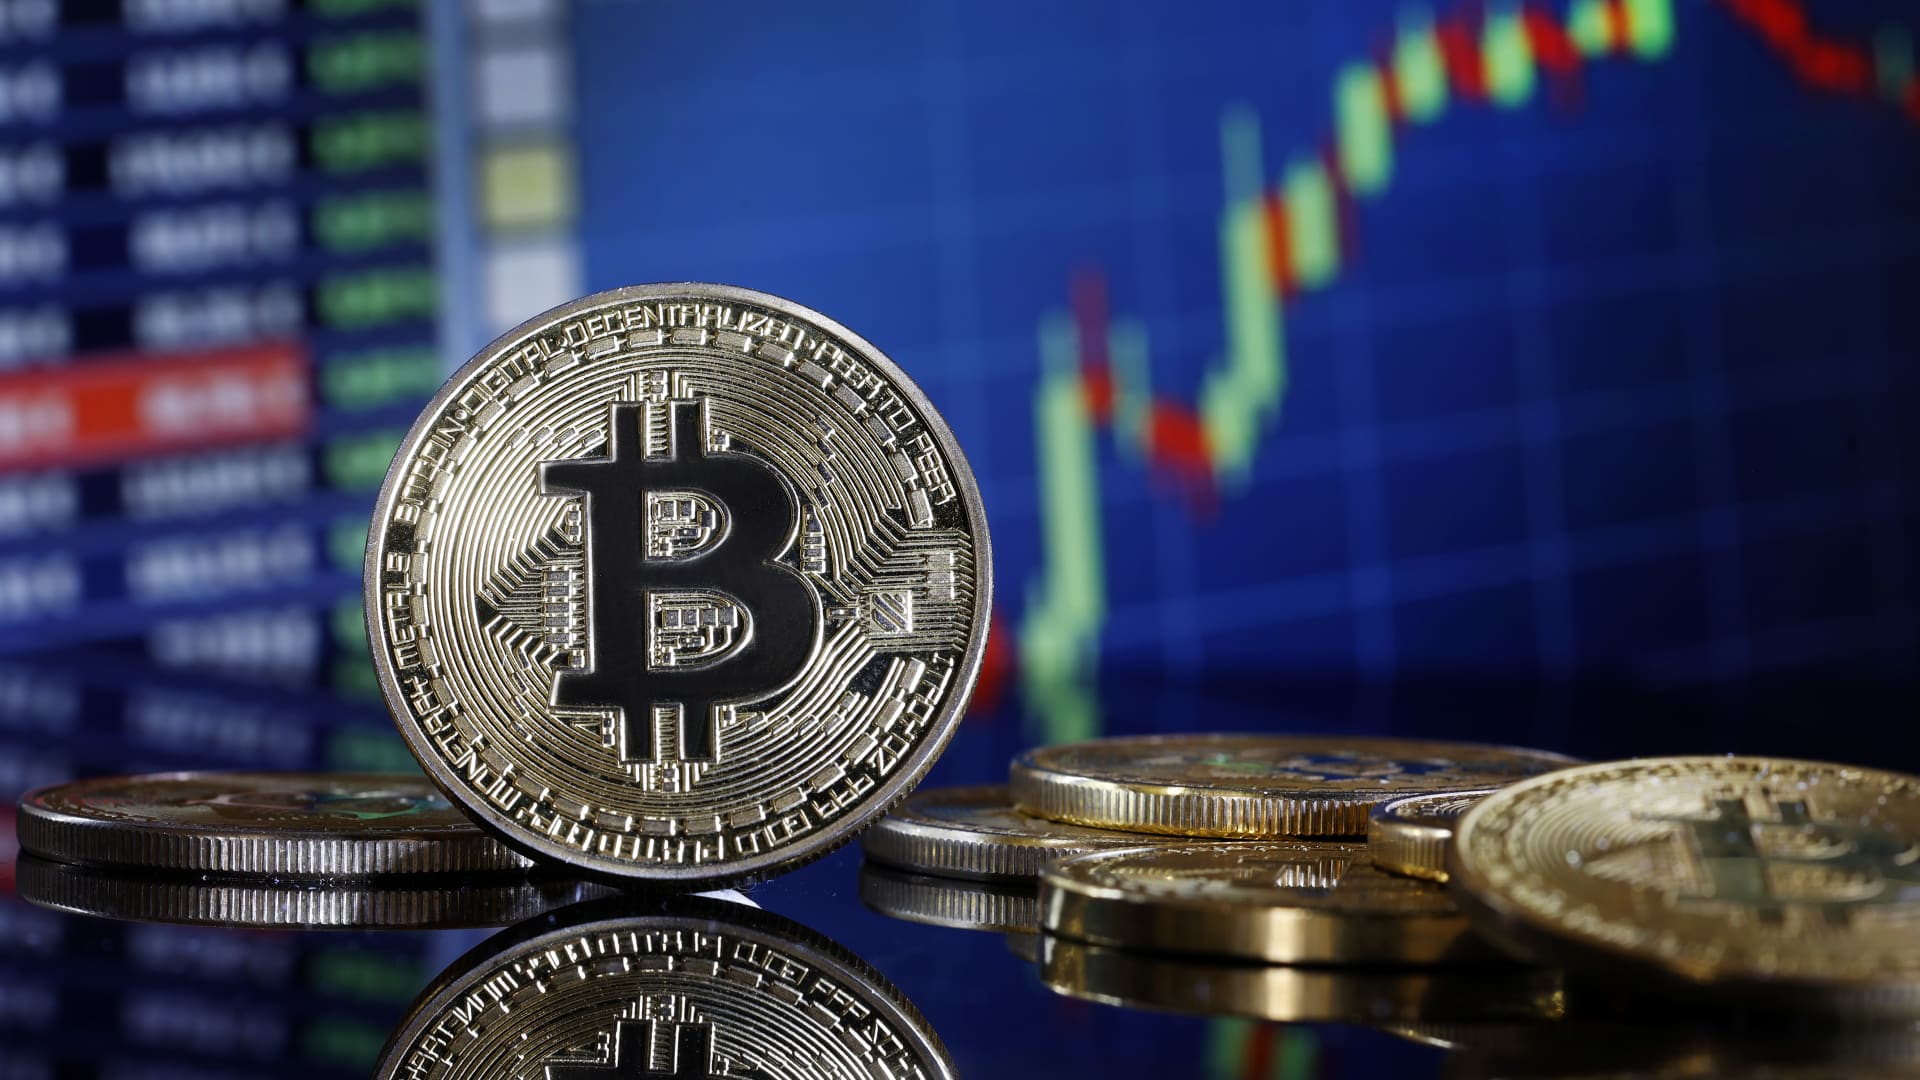 Bitcoin ETFs have a fundamental difference from their stock fund counterparts